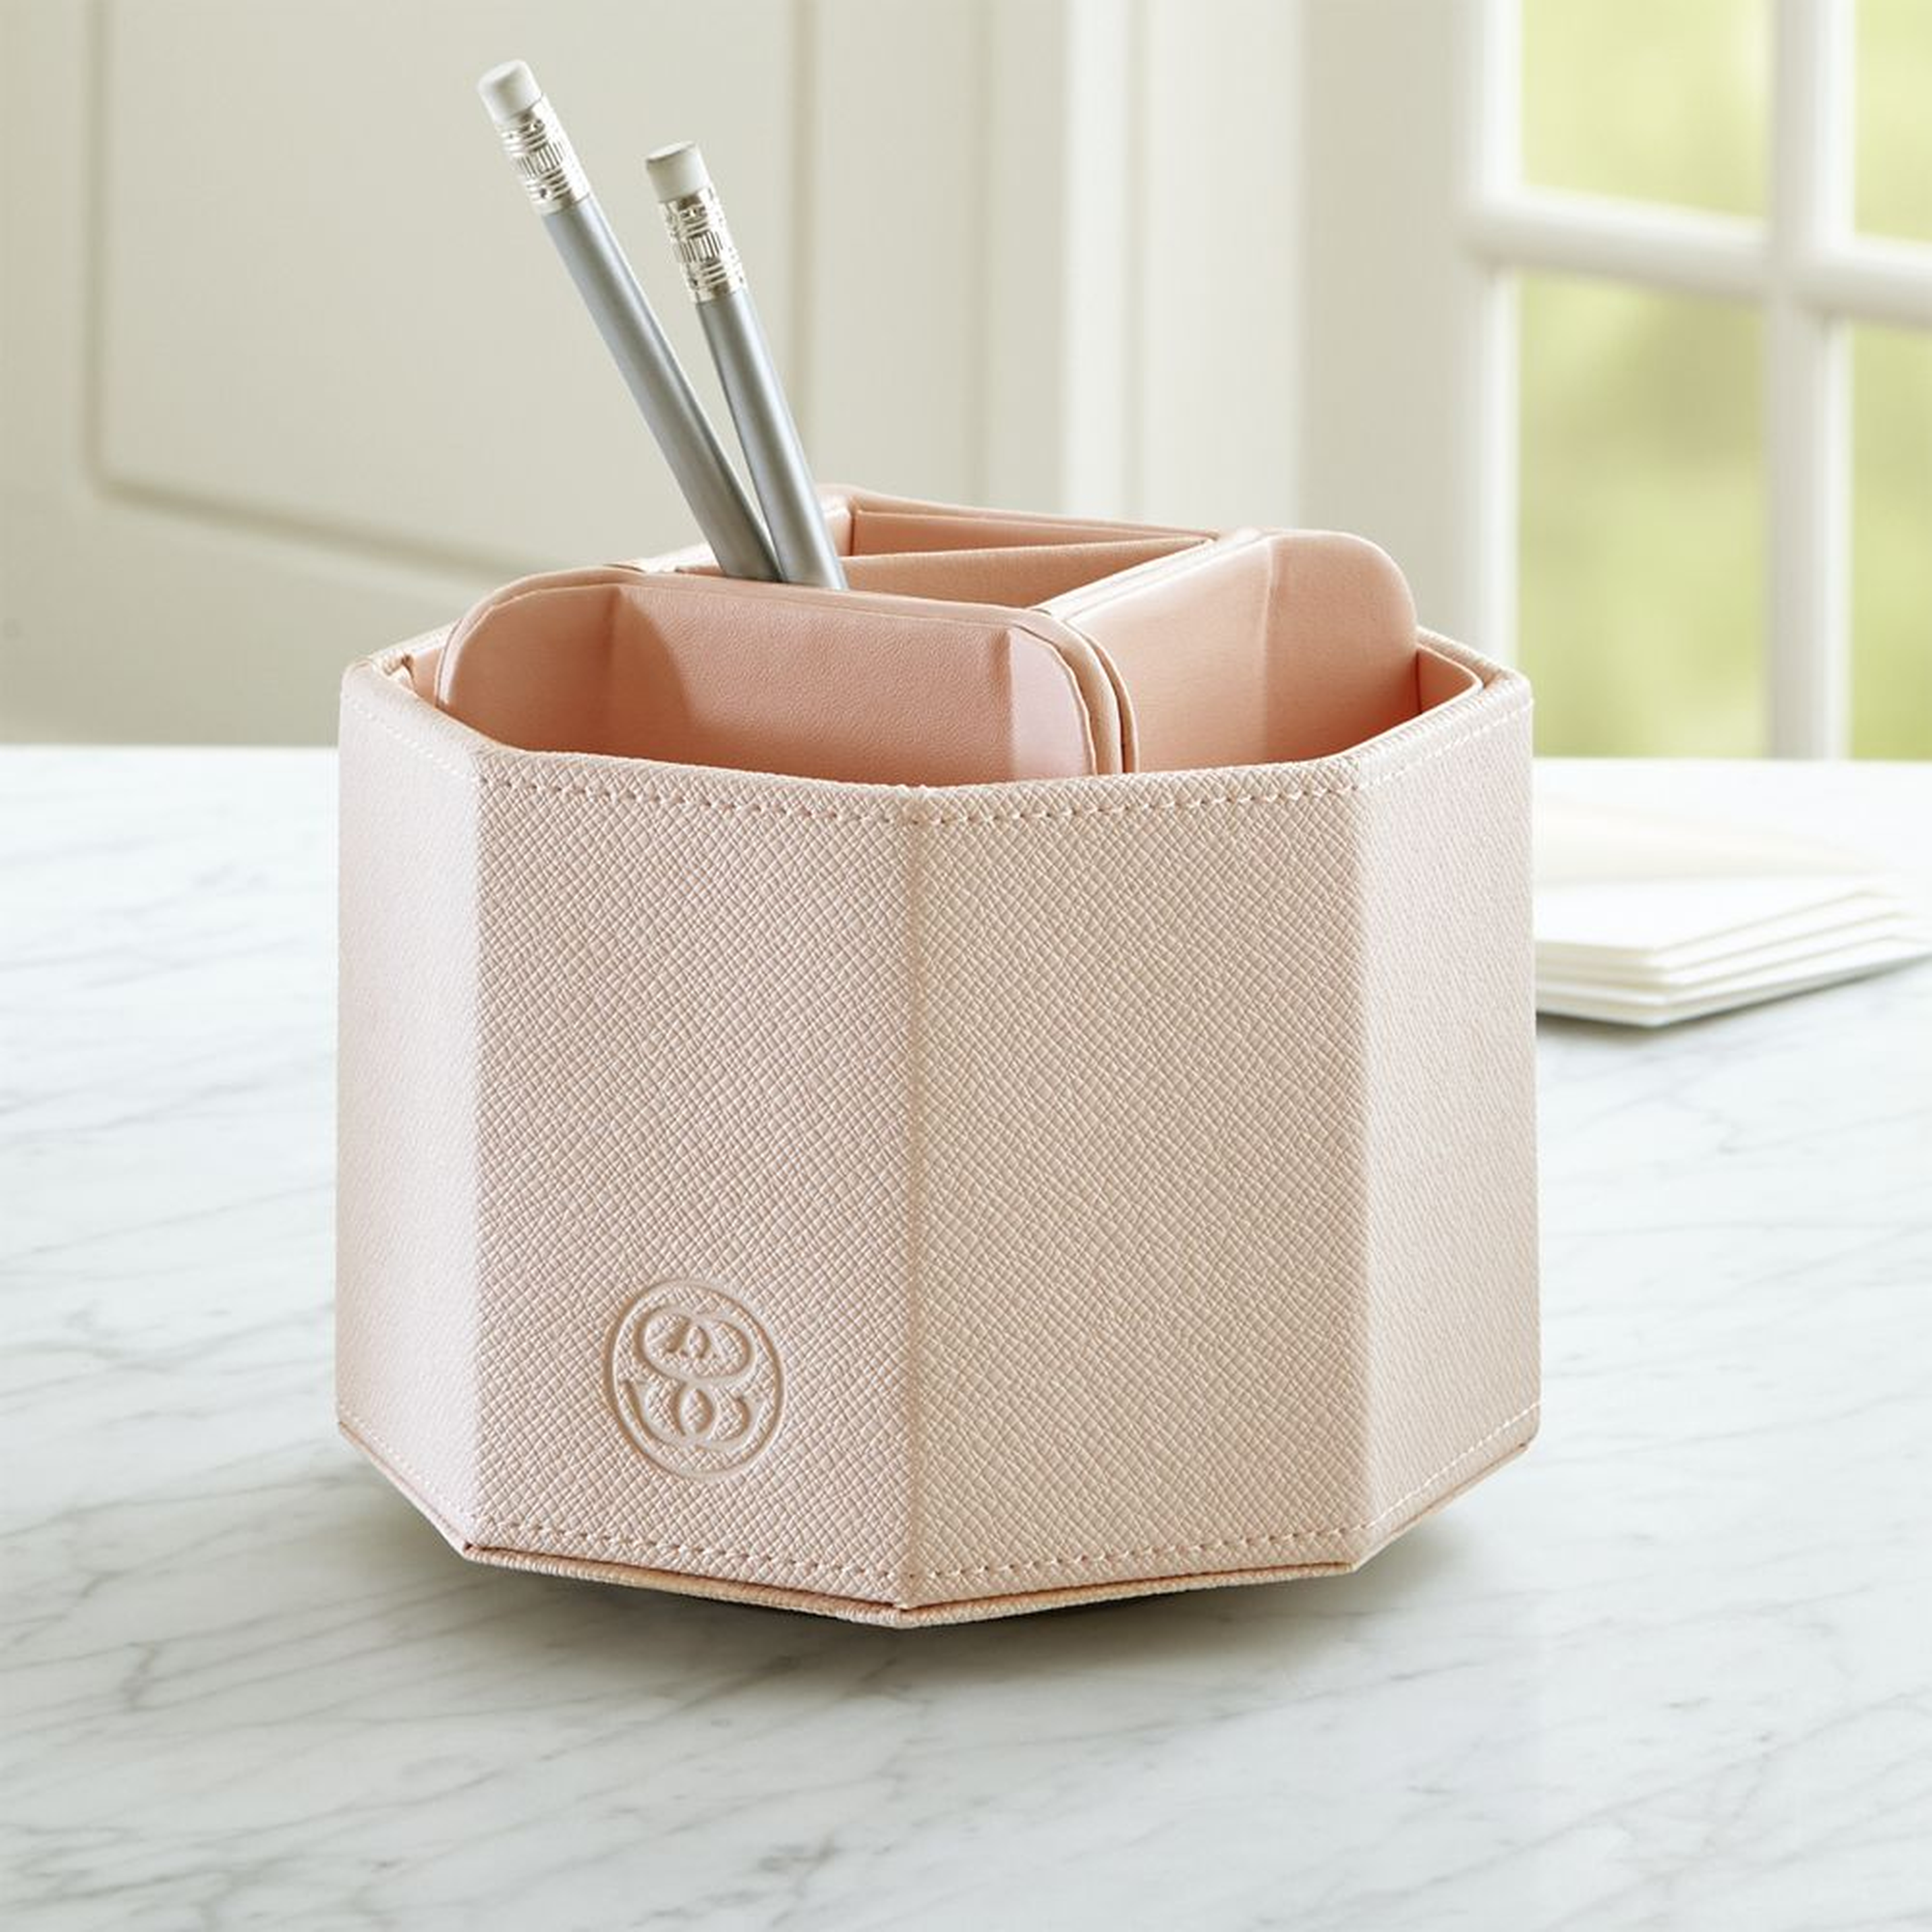 Agency Blush/Pale Pink Pencil Carousel - Crate and Barrel